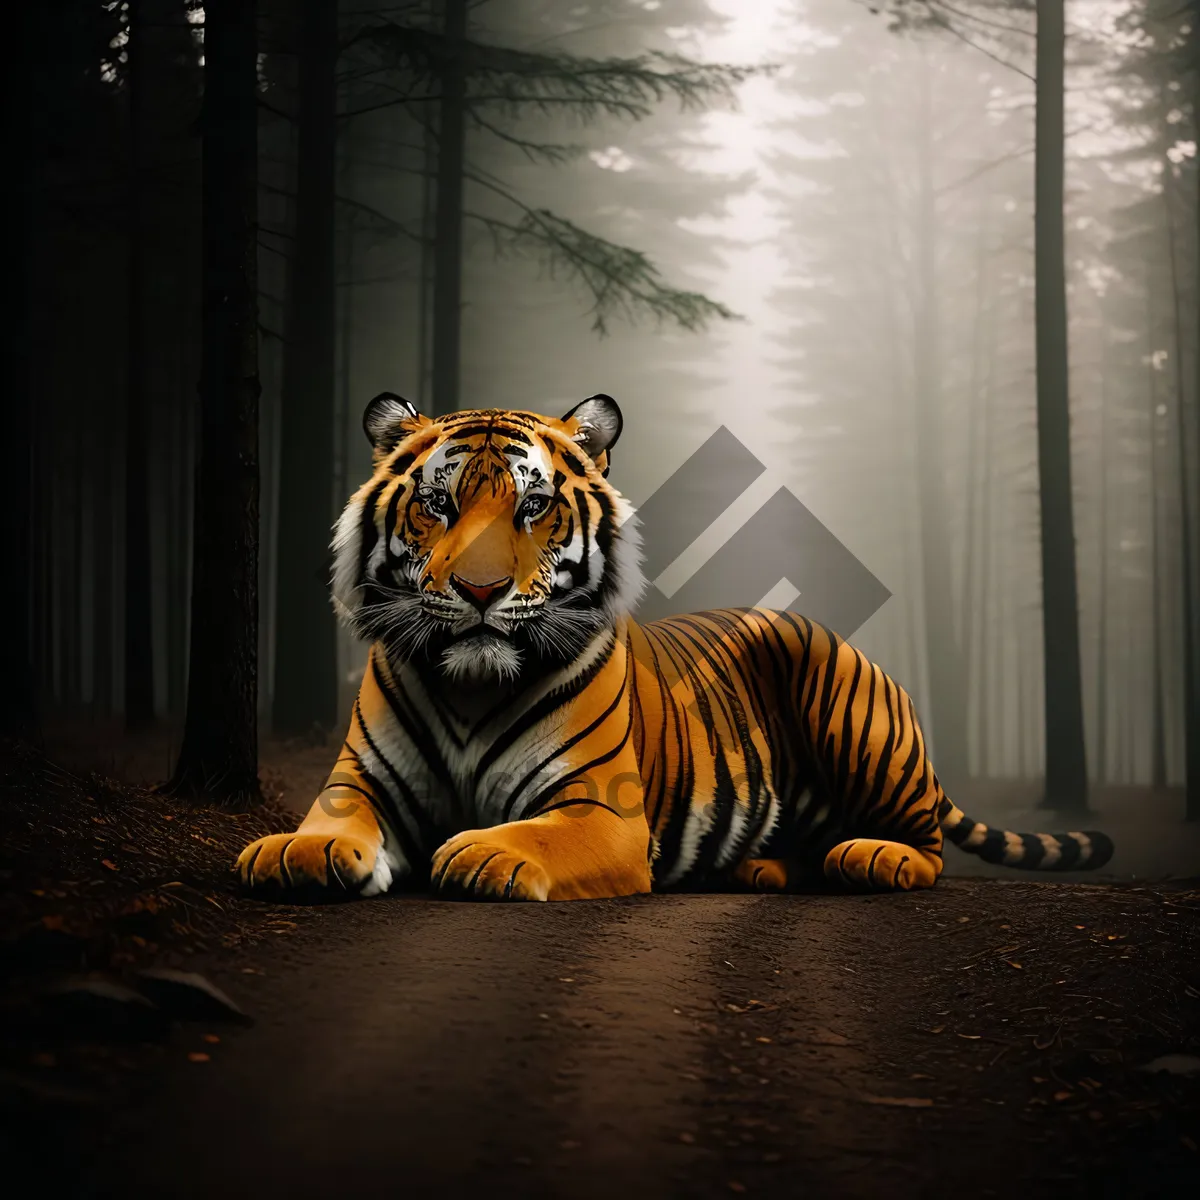 Picture of Powerful Striped Predator Roaming the Jungle